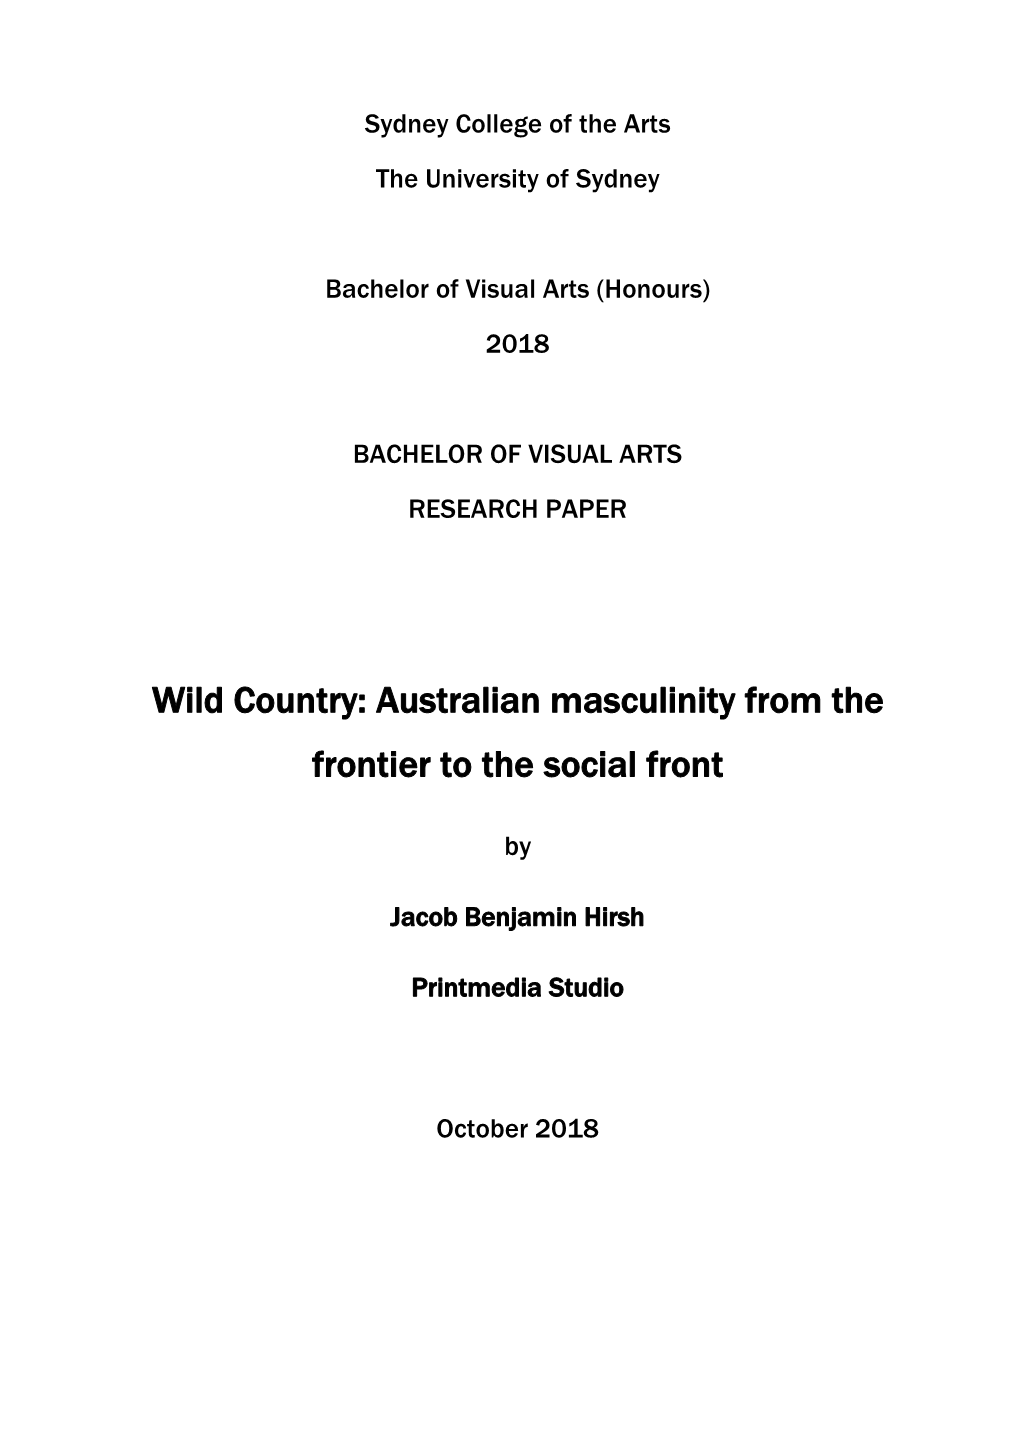 Wild Country: Australian Masculinity from the Frontier to the Social Front